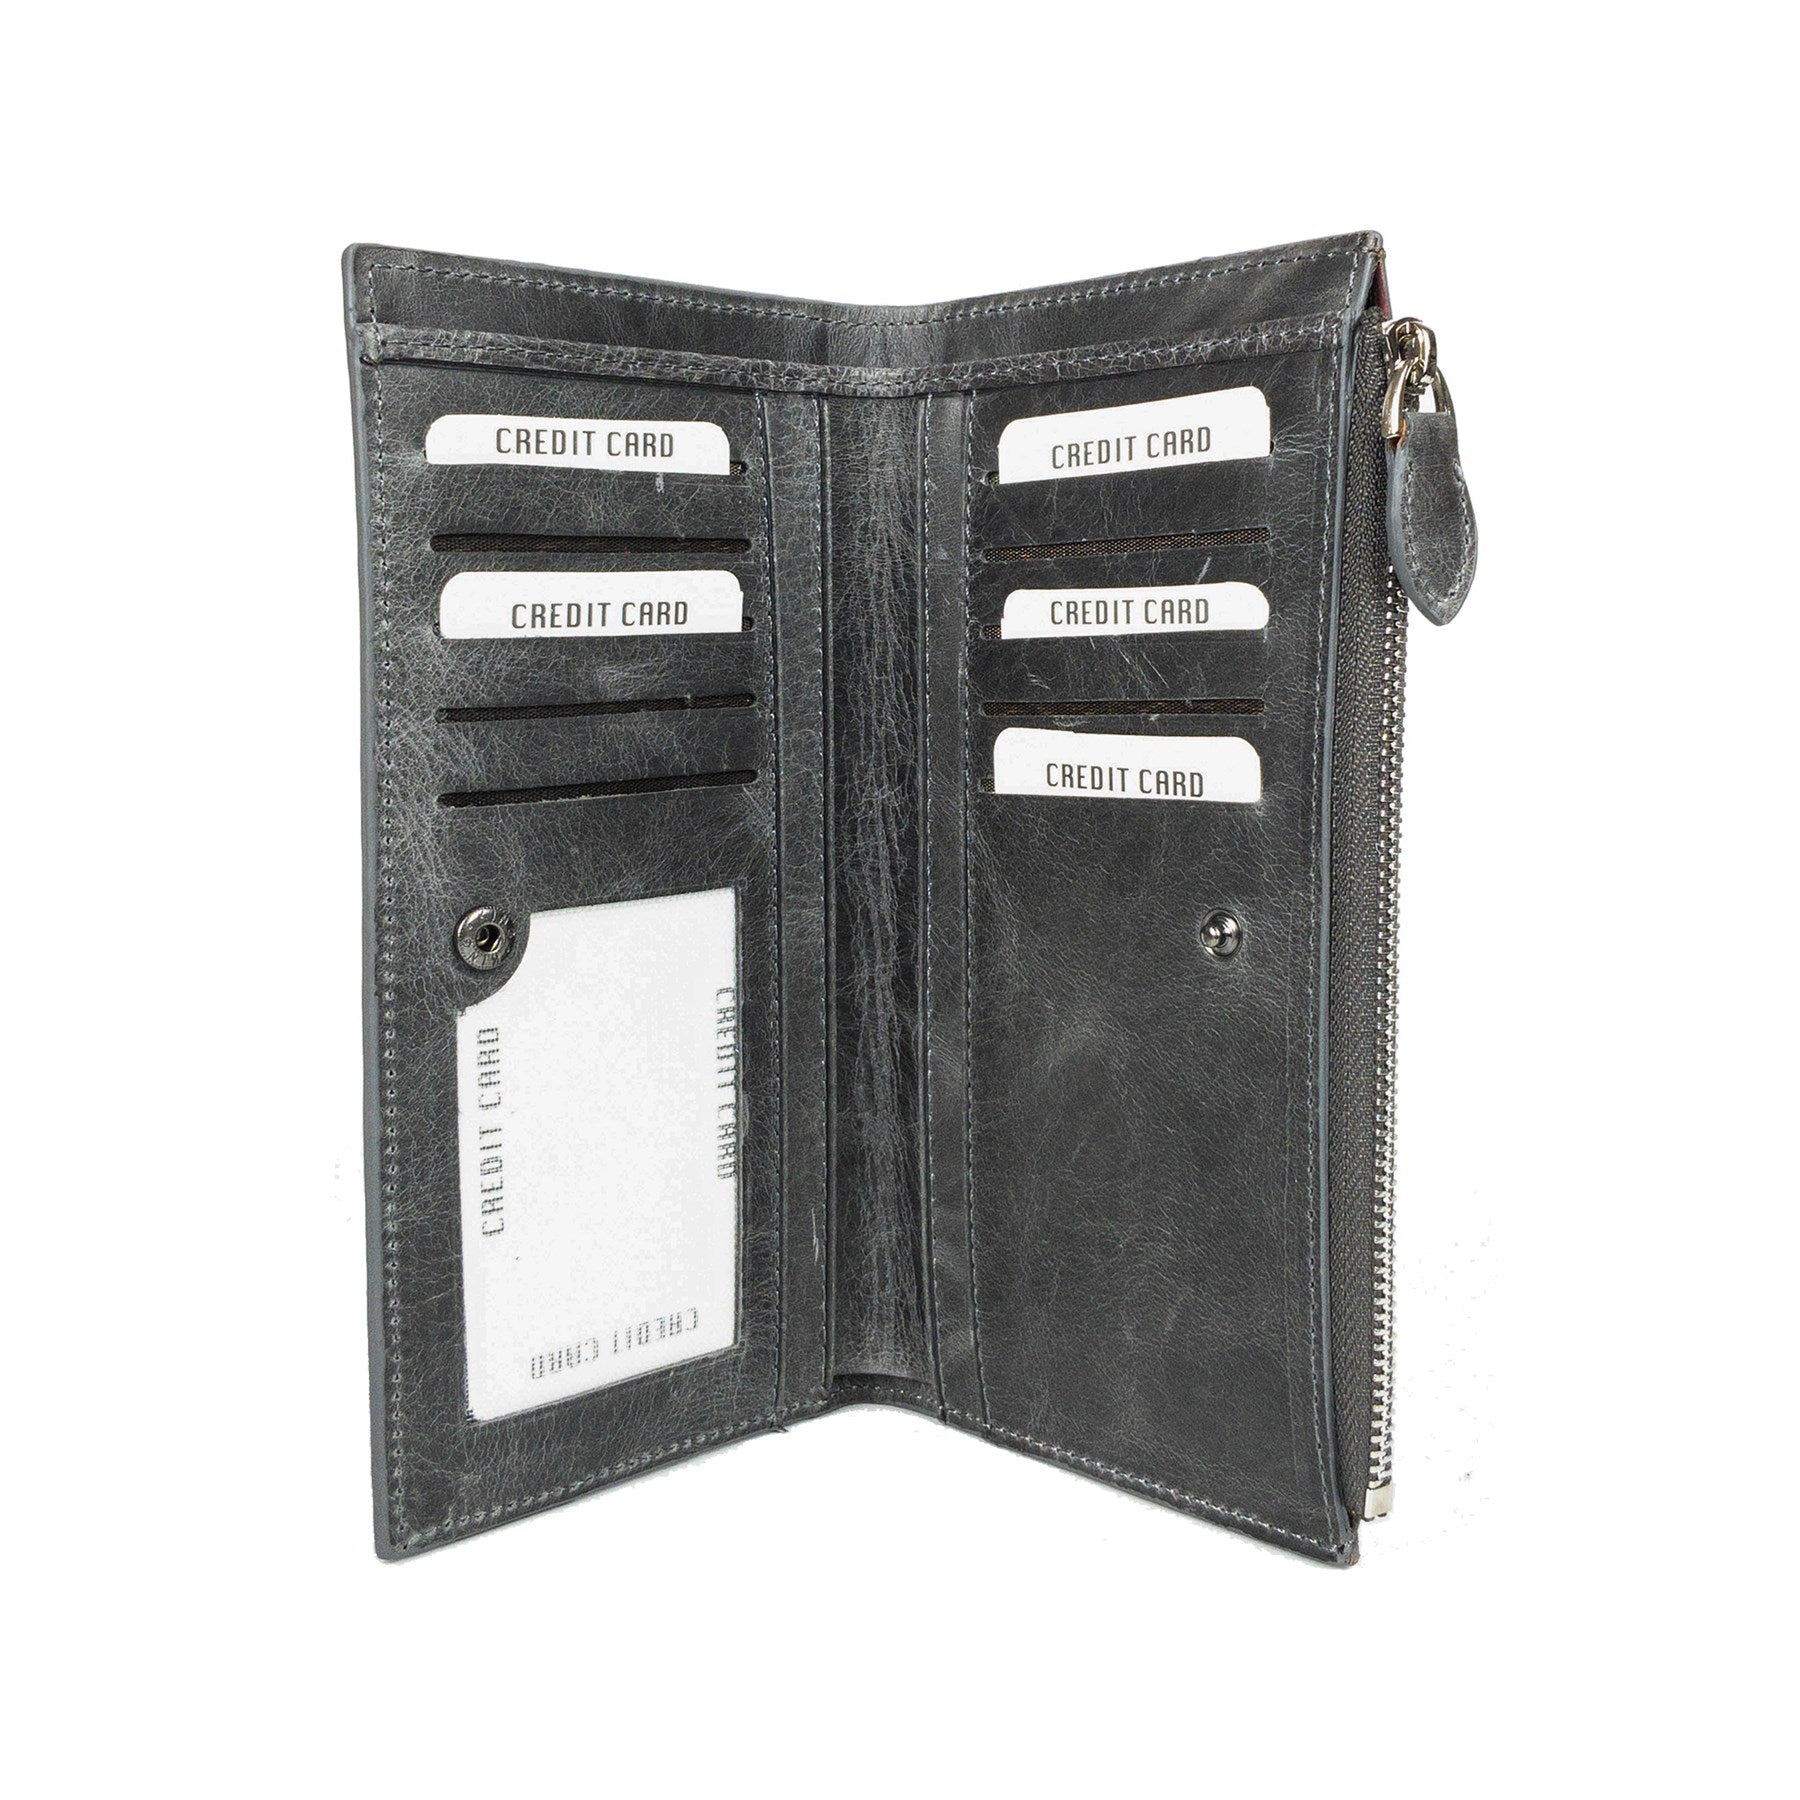  Mannu - Genuine Leather Large Wallet with Hand Band